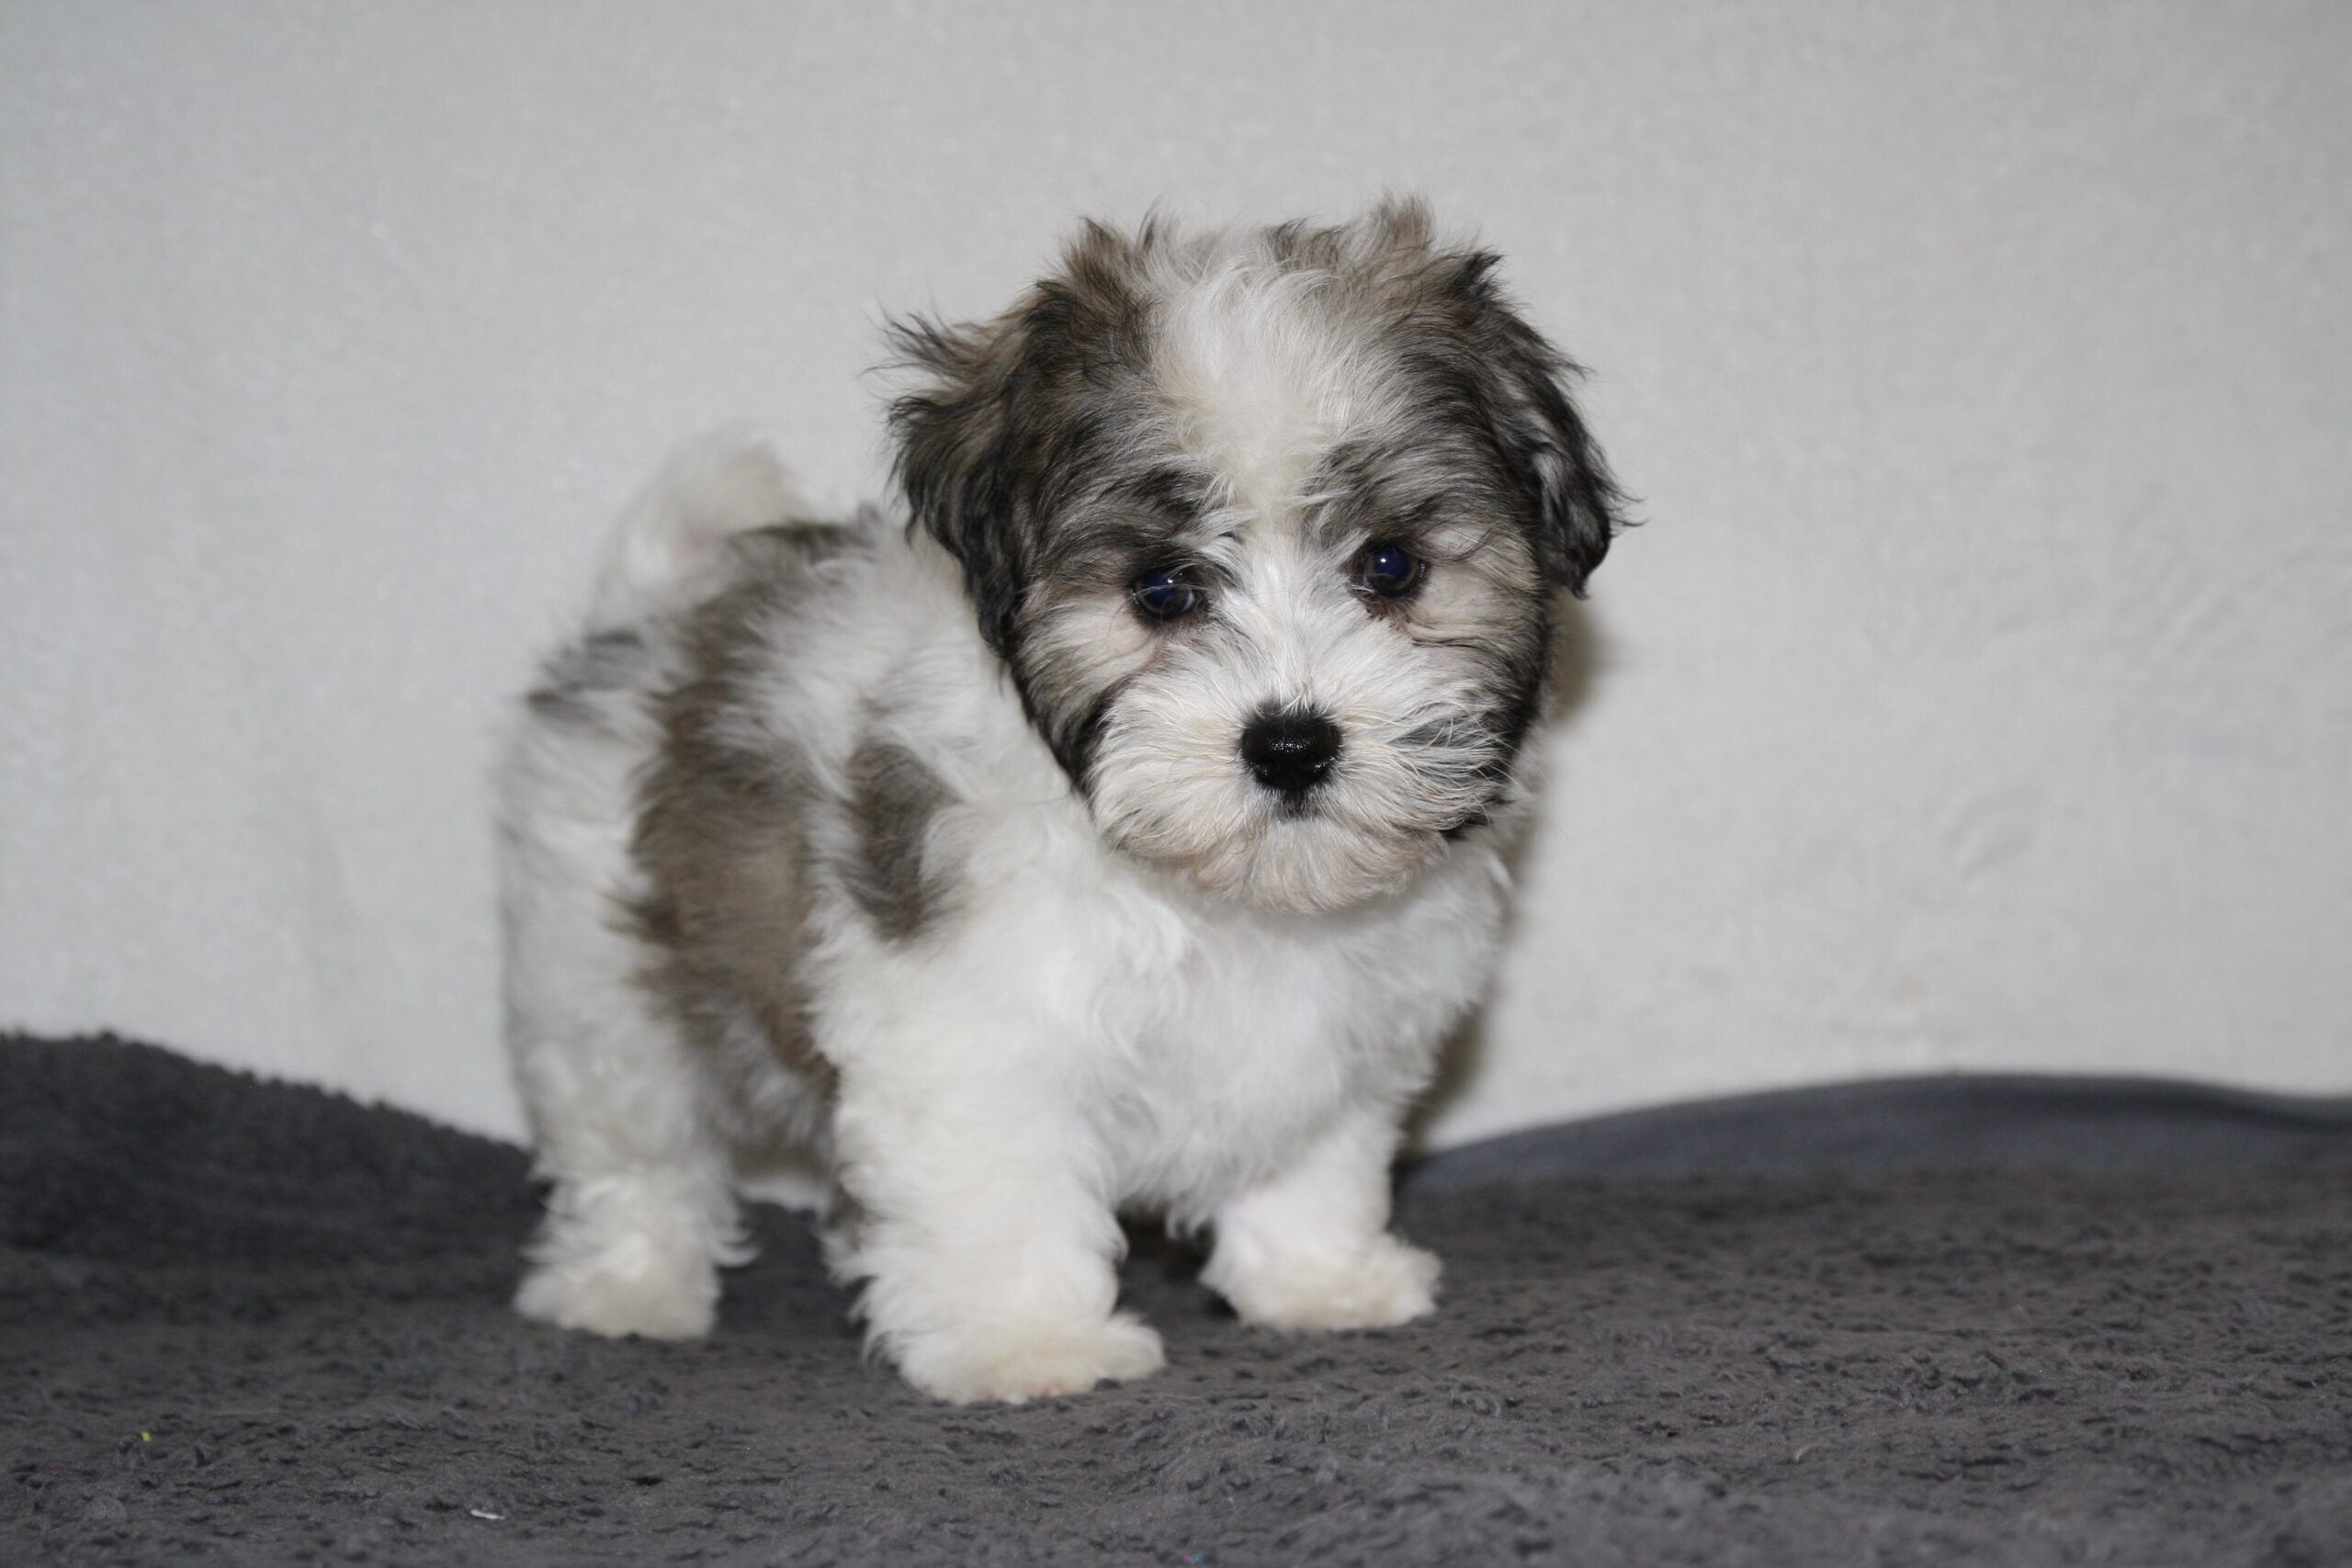 "Beau"
DOB: 5/20/2022
Breed: Havanese
Sex: Male
Availability: Ready to go home.
Price: $1000